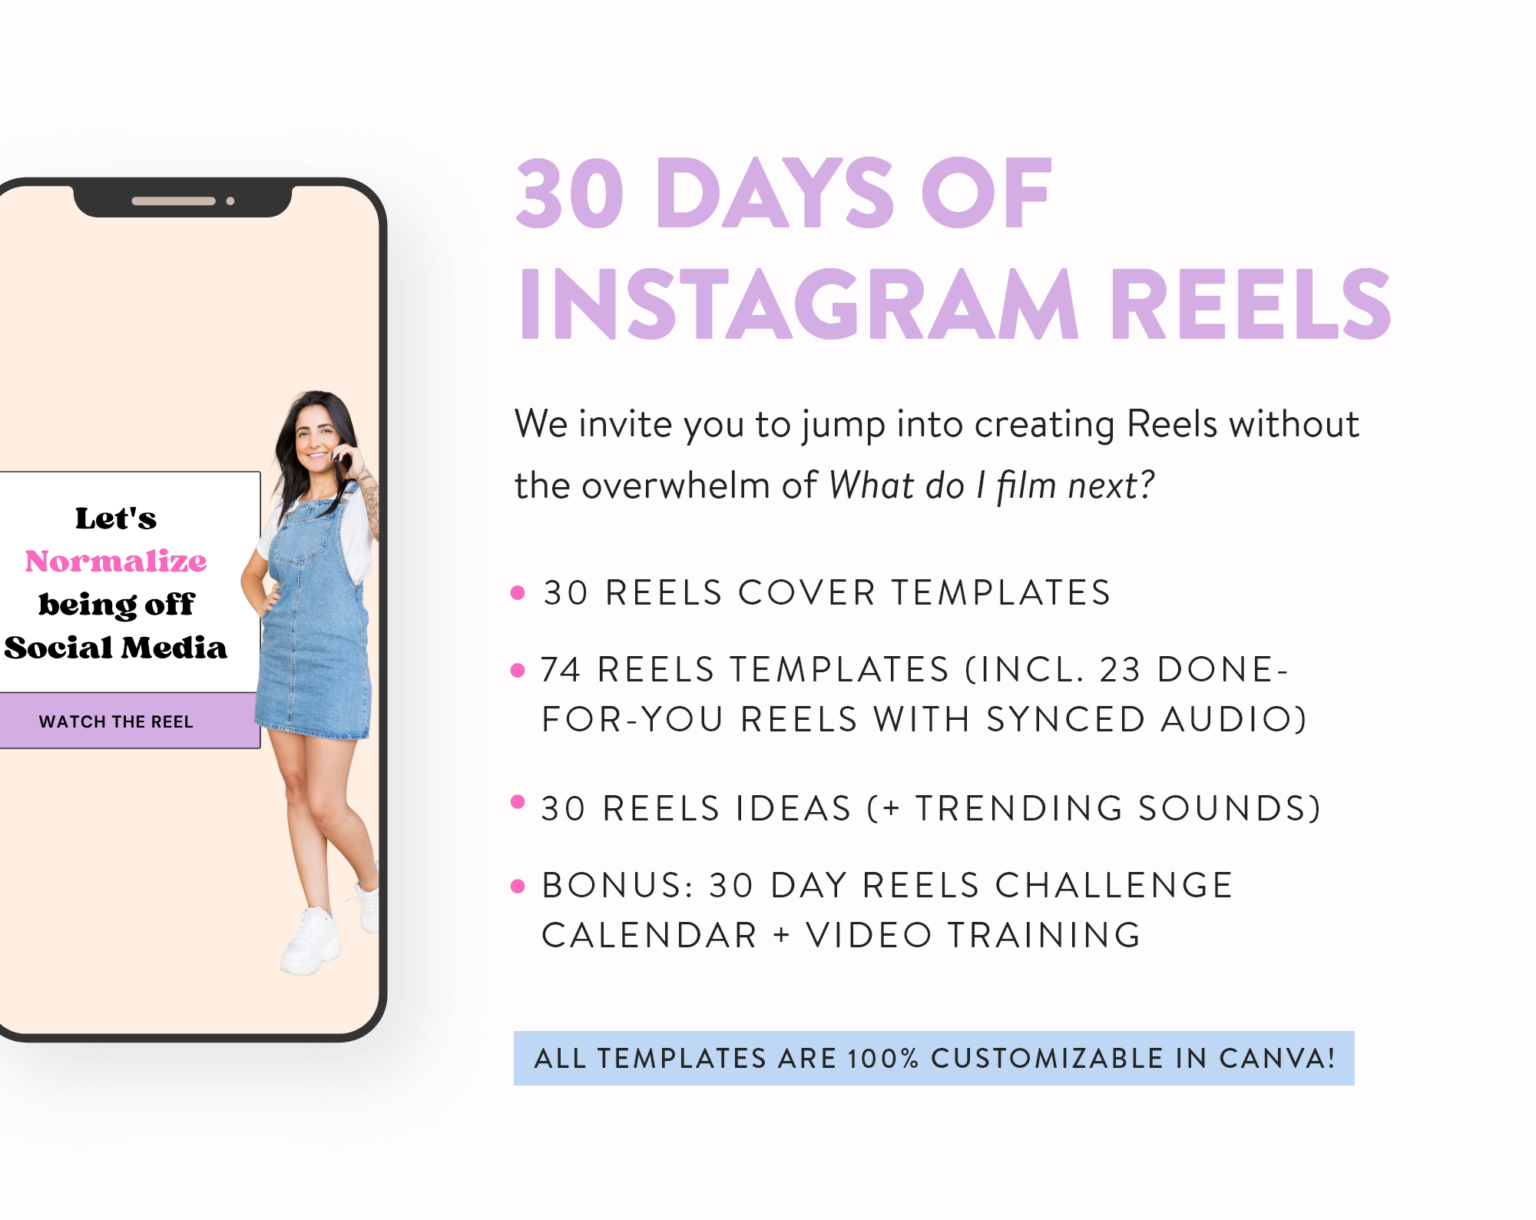 Instagram-reels-challenge-templates-for-canva-overview-1